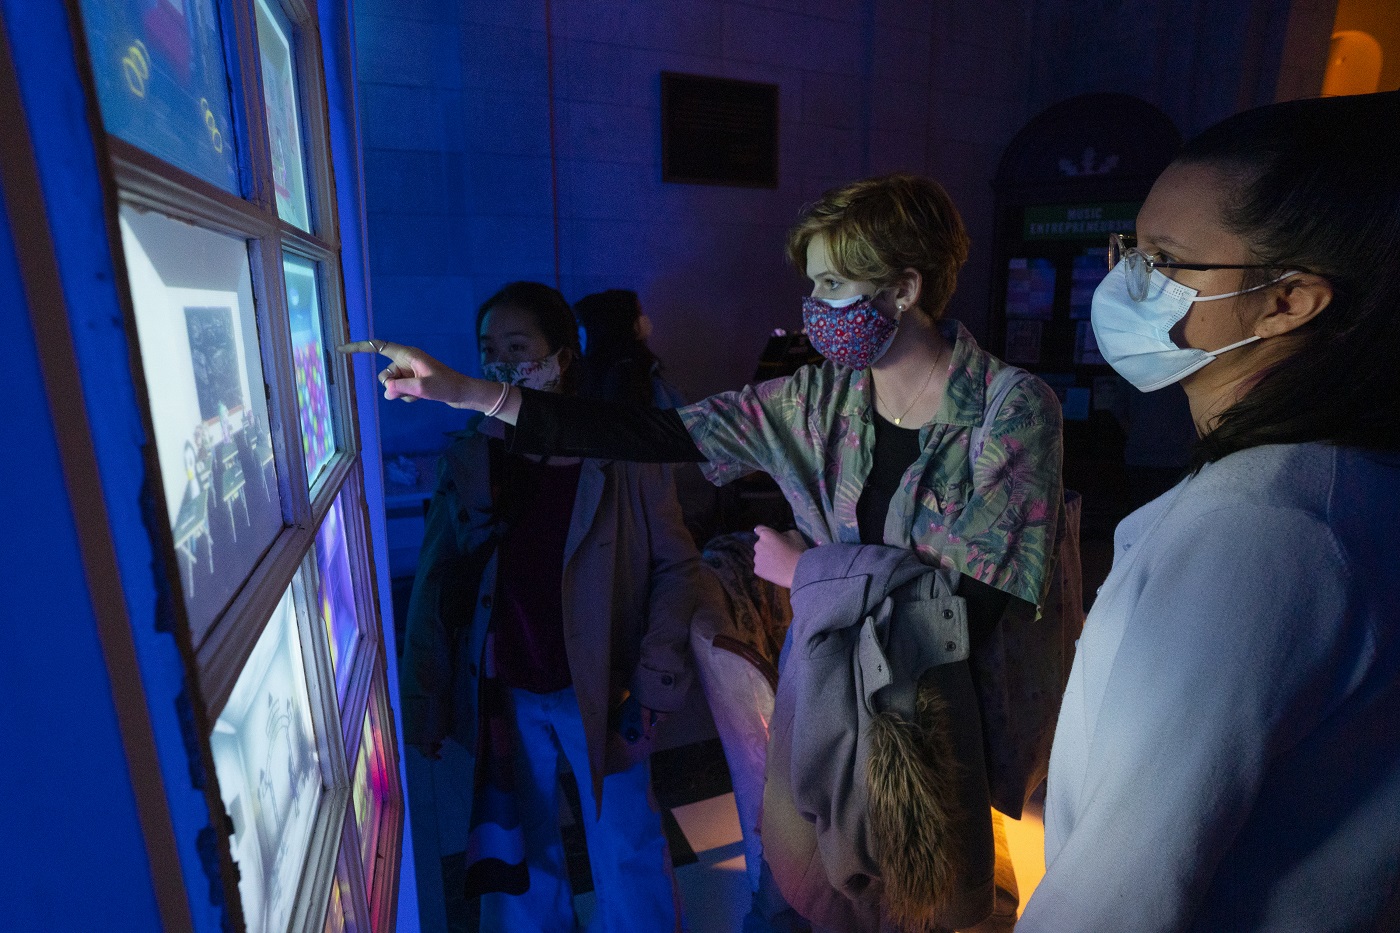 Visitors to an Exploded Ensemble event looking at screens and pointing